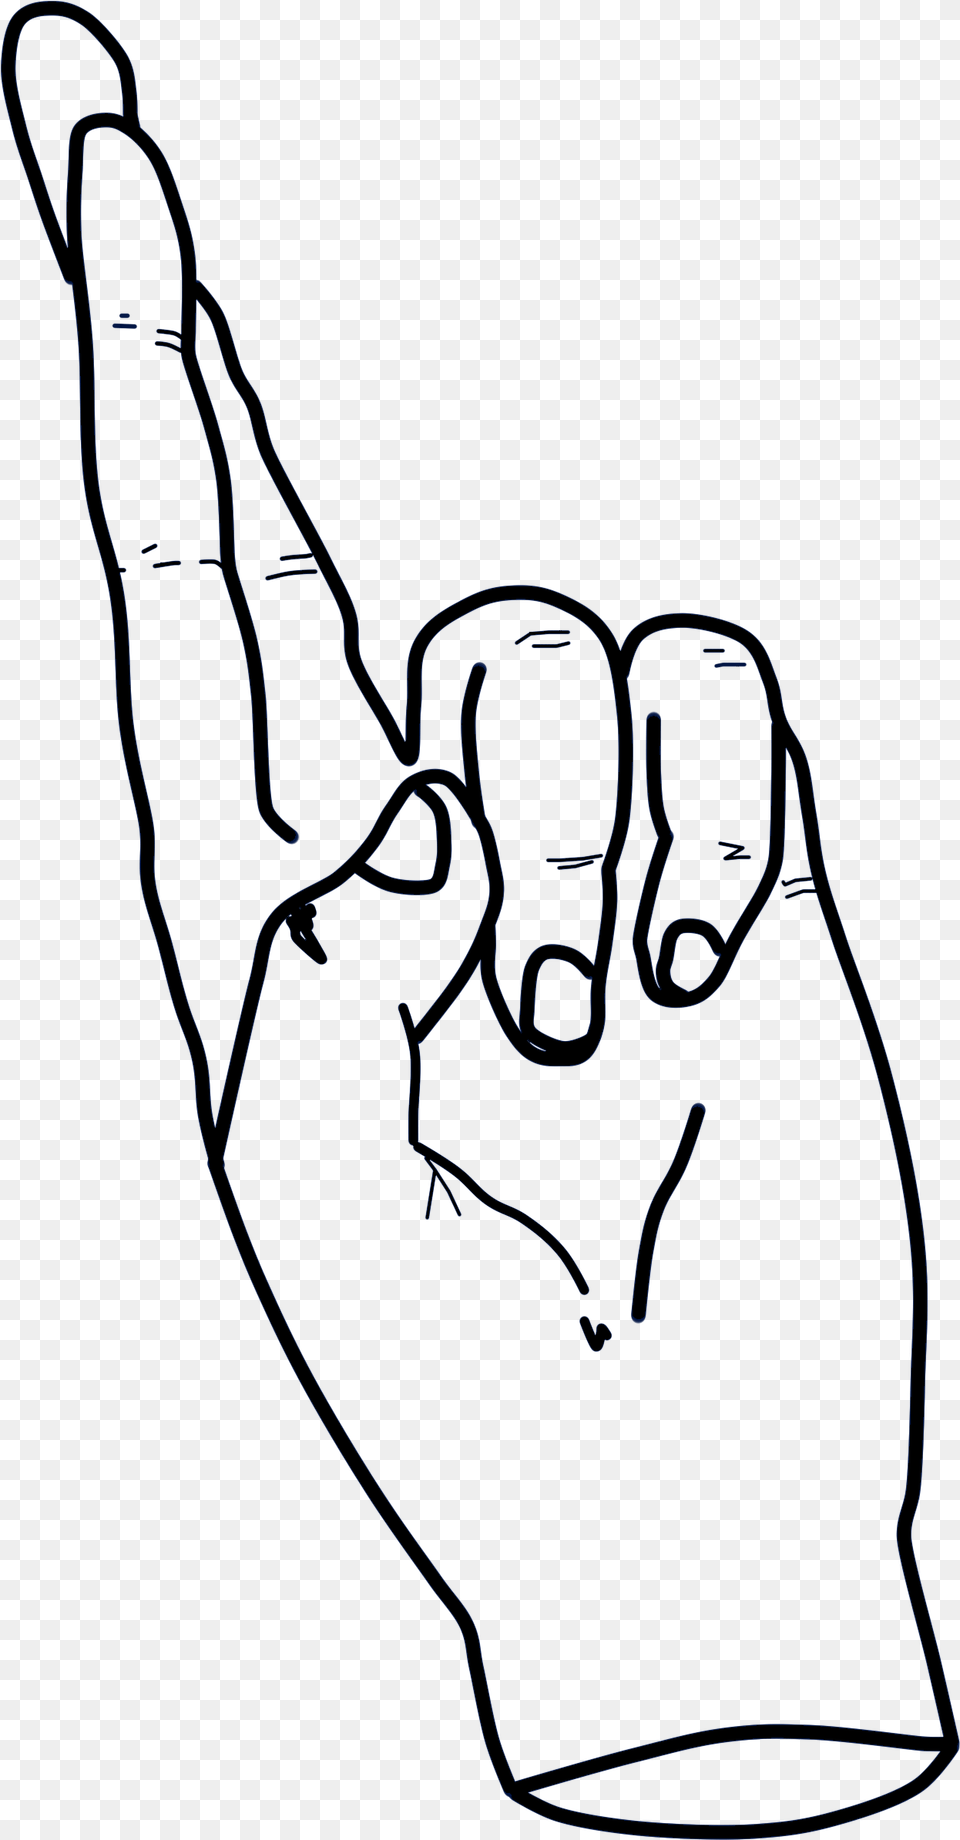 Fingers Crossed Hd Fingers Crossed Line Art, Clothing, Glove, Body Part, Hand Free Transparent Png